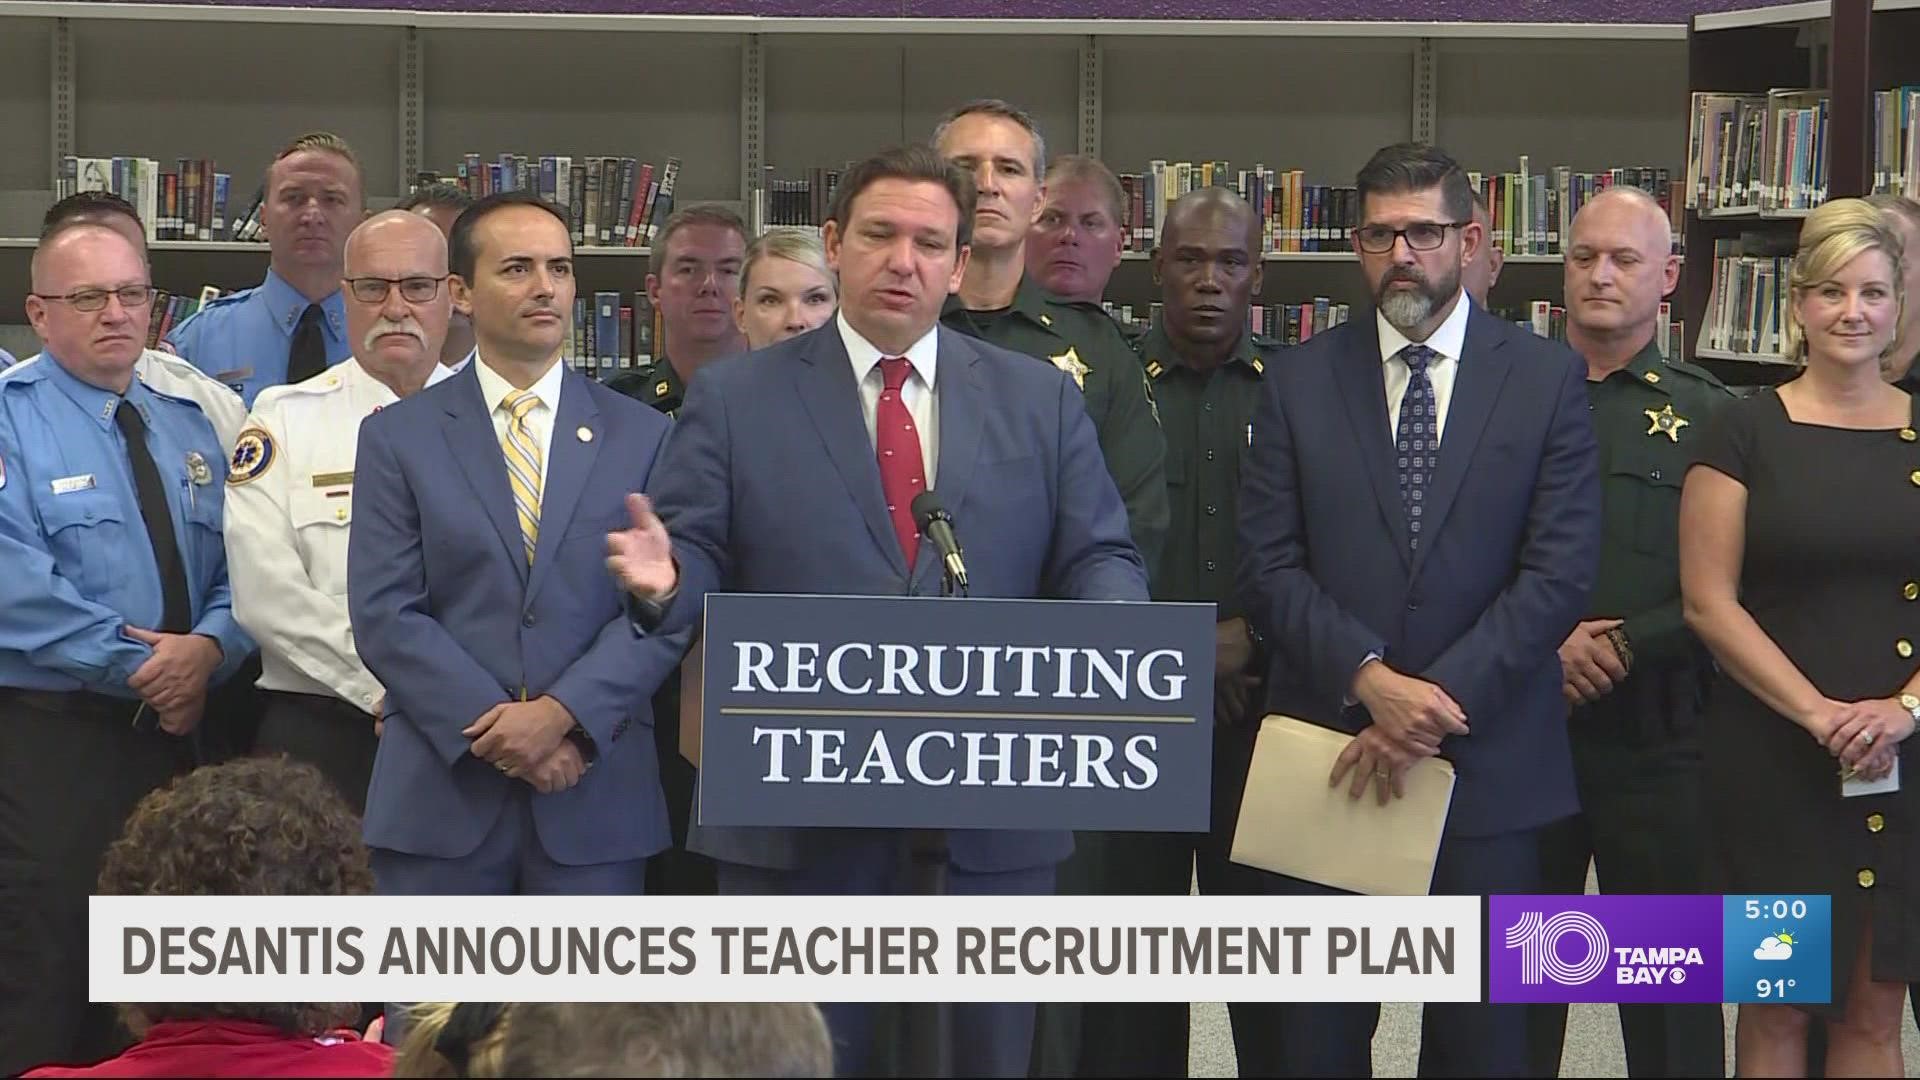 The governor hopes these programs will boost teacher recruitment and retention amid ongoing shortages.